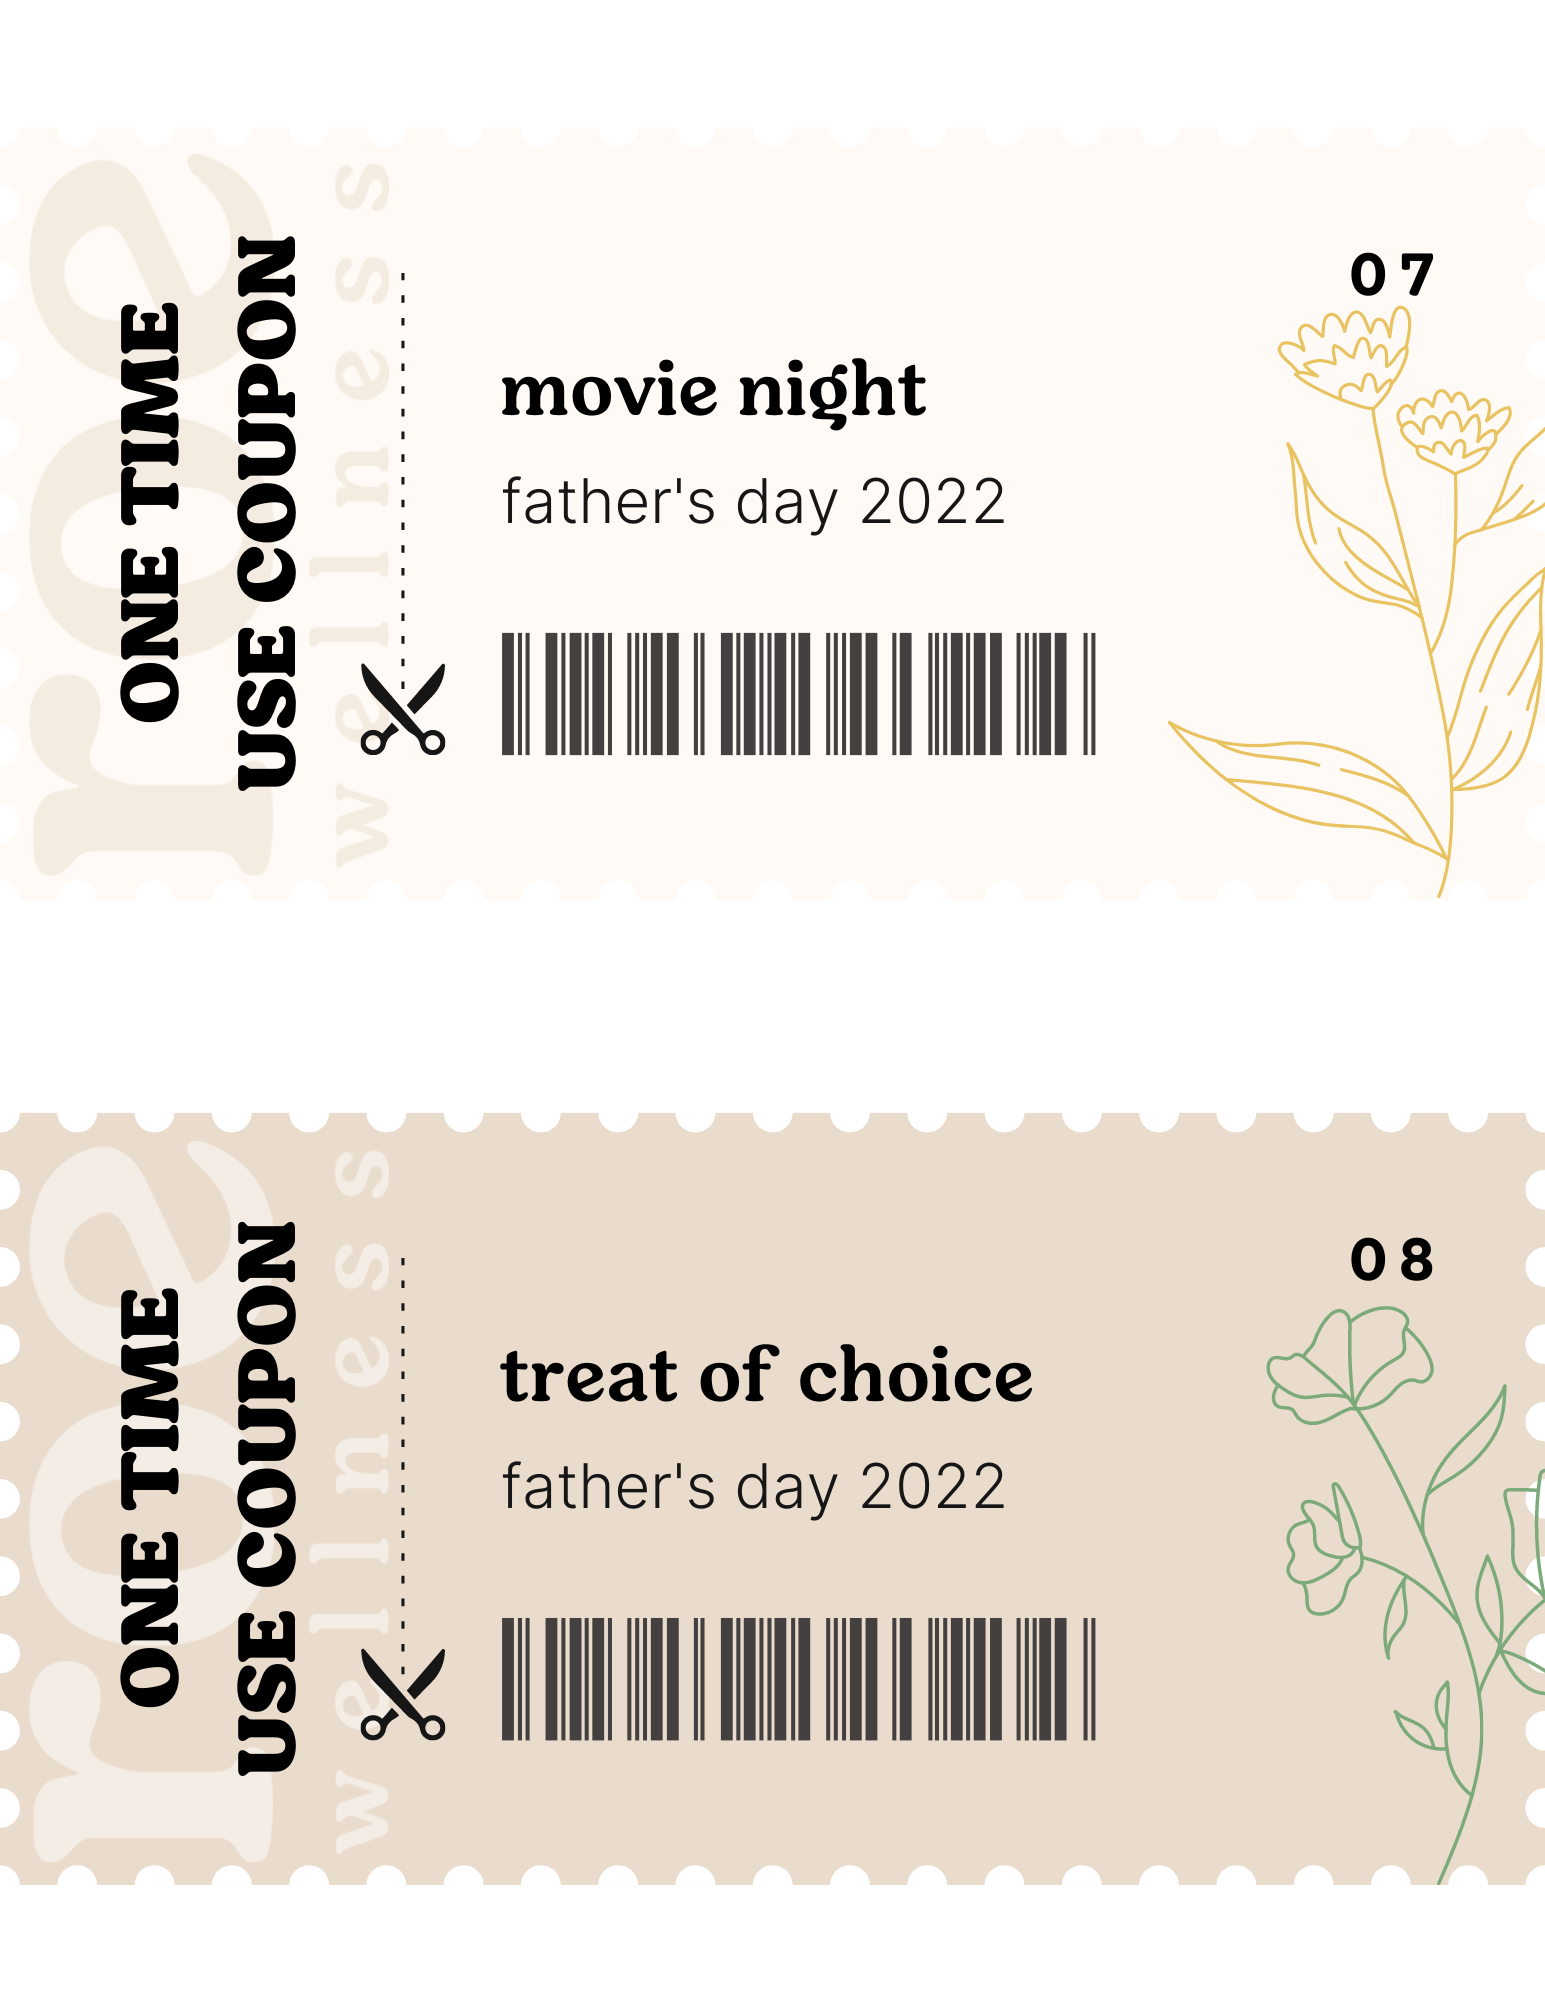 Movie night with dad. Coupon for a treat of choice for Father's Day.